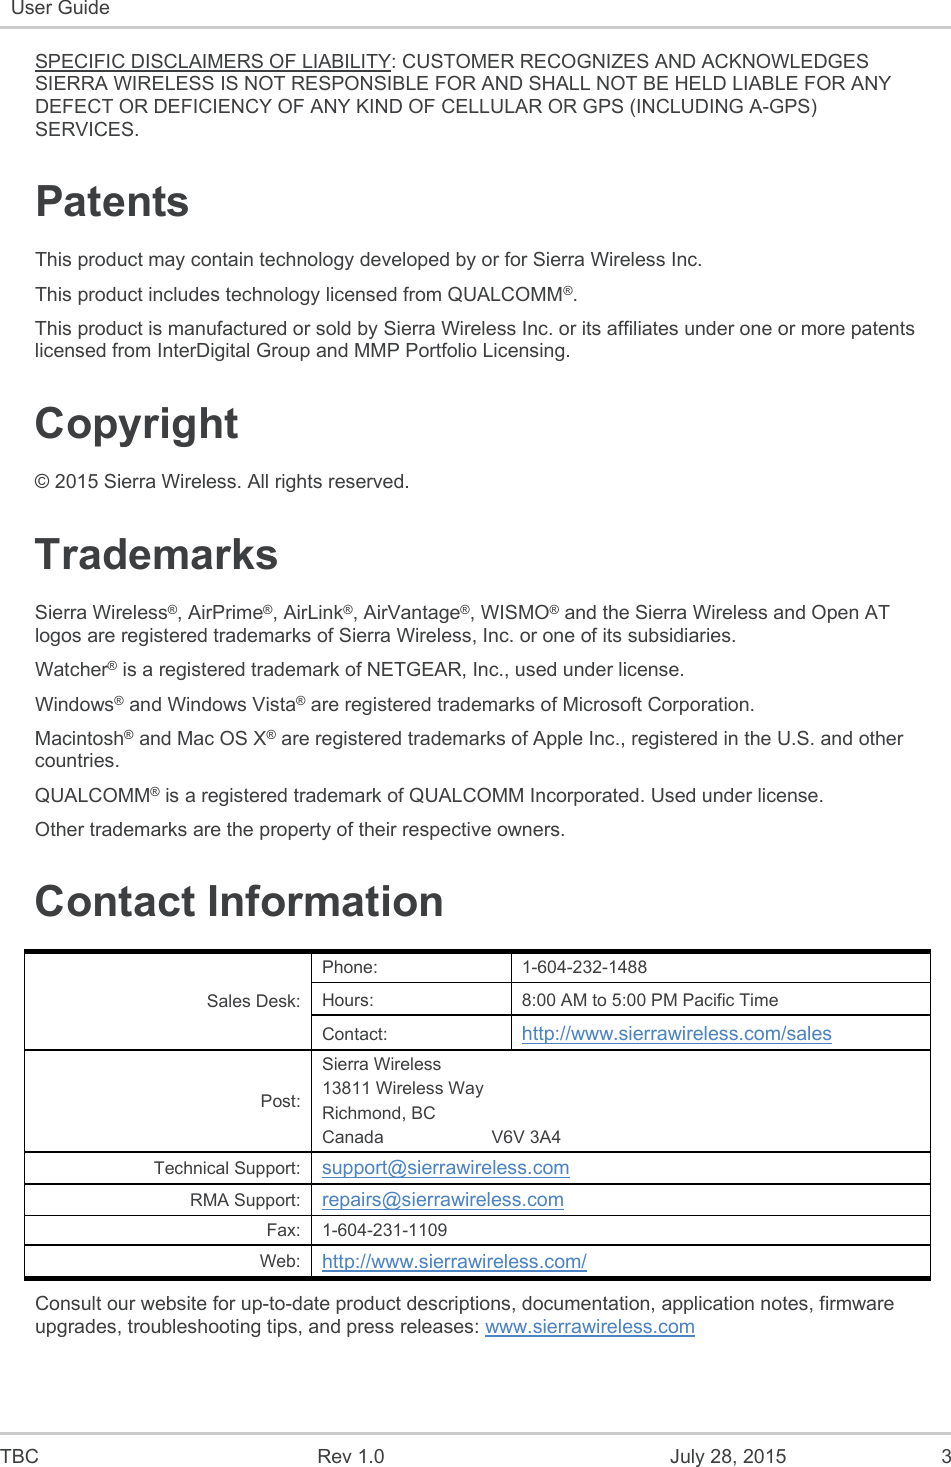  TBC  Rev 1.0  July 28, 2015  3 User Guide   SPECIFIC DISCLAIMERS OF LIABILITY: CUSTOMER RECOGNIZES AND ACKNOWLEDGES SIERRA WIRELESS IS NOT RESPONSIBLE FOR AND SHALL NOT BE HELD LIABLE FOR ANY DEFECT OR DEFICIENCY OF ANY KIND OF CELLULAR OR GPS (INCLUDING A-GPS) SERVICES. Patents This product may contain technology developed by or for Sierra Wireless Inc. This product includes technology licensed from QUALCOMM®. This product is manufactured or sold by Sierra Wireless Inc. or its affiliates under one or more patents licensed from InterDigital Group and MMP Portfolio Licensing. Copyright © 2015 Sierra Wireless. All rights reserved. Trademarks Sierra Wireless®, AirPrime®, AirLink®, AirVantage®, WISMO® and the Sierra Wireless and Open AT logos are registered trademarks of Sierra Wireless, Inc. or one of its subsidiaries. Watcher® is a registered trademark of NETGEAR, Inc., used under license. Windows® and Windows Vista® are registered trademarks of Microsoft Corporation. Macintosh® and Mac OS X® are registered trademarks of Apple Inc., registered in the U.S. and other countries. QUALCOMM® is a registered trademark of QUALCOMM Incorporated. Used under license. Other trademarks are the property of their respective owners. Contact Information Sales Desk: Phone:  1-604-232-1488 Hours:  8:00 AM to 5:00 PM Pacific Time Contact:  http://www.sierrawireless.com/sales Post: Sierra Wireless 13811 Wireless Way Richmond, BC Canada                      V6V 3A4 Technical Support:  support@sierrawireless.com RMA Support:  repairs@sierrawireless.com Fax:  1-604-231-1109 Web:  http://www.sierrawireless.com/ Consult our website for up-to-date product descriptions, documentation, application notes, firmware upgrades, troubleshooting tips, and press releases: www.sierrawireless.com 